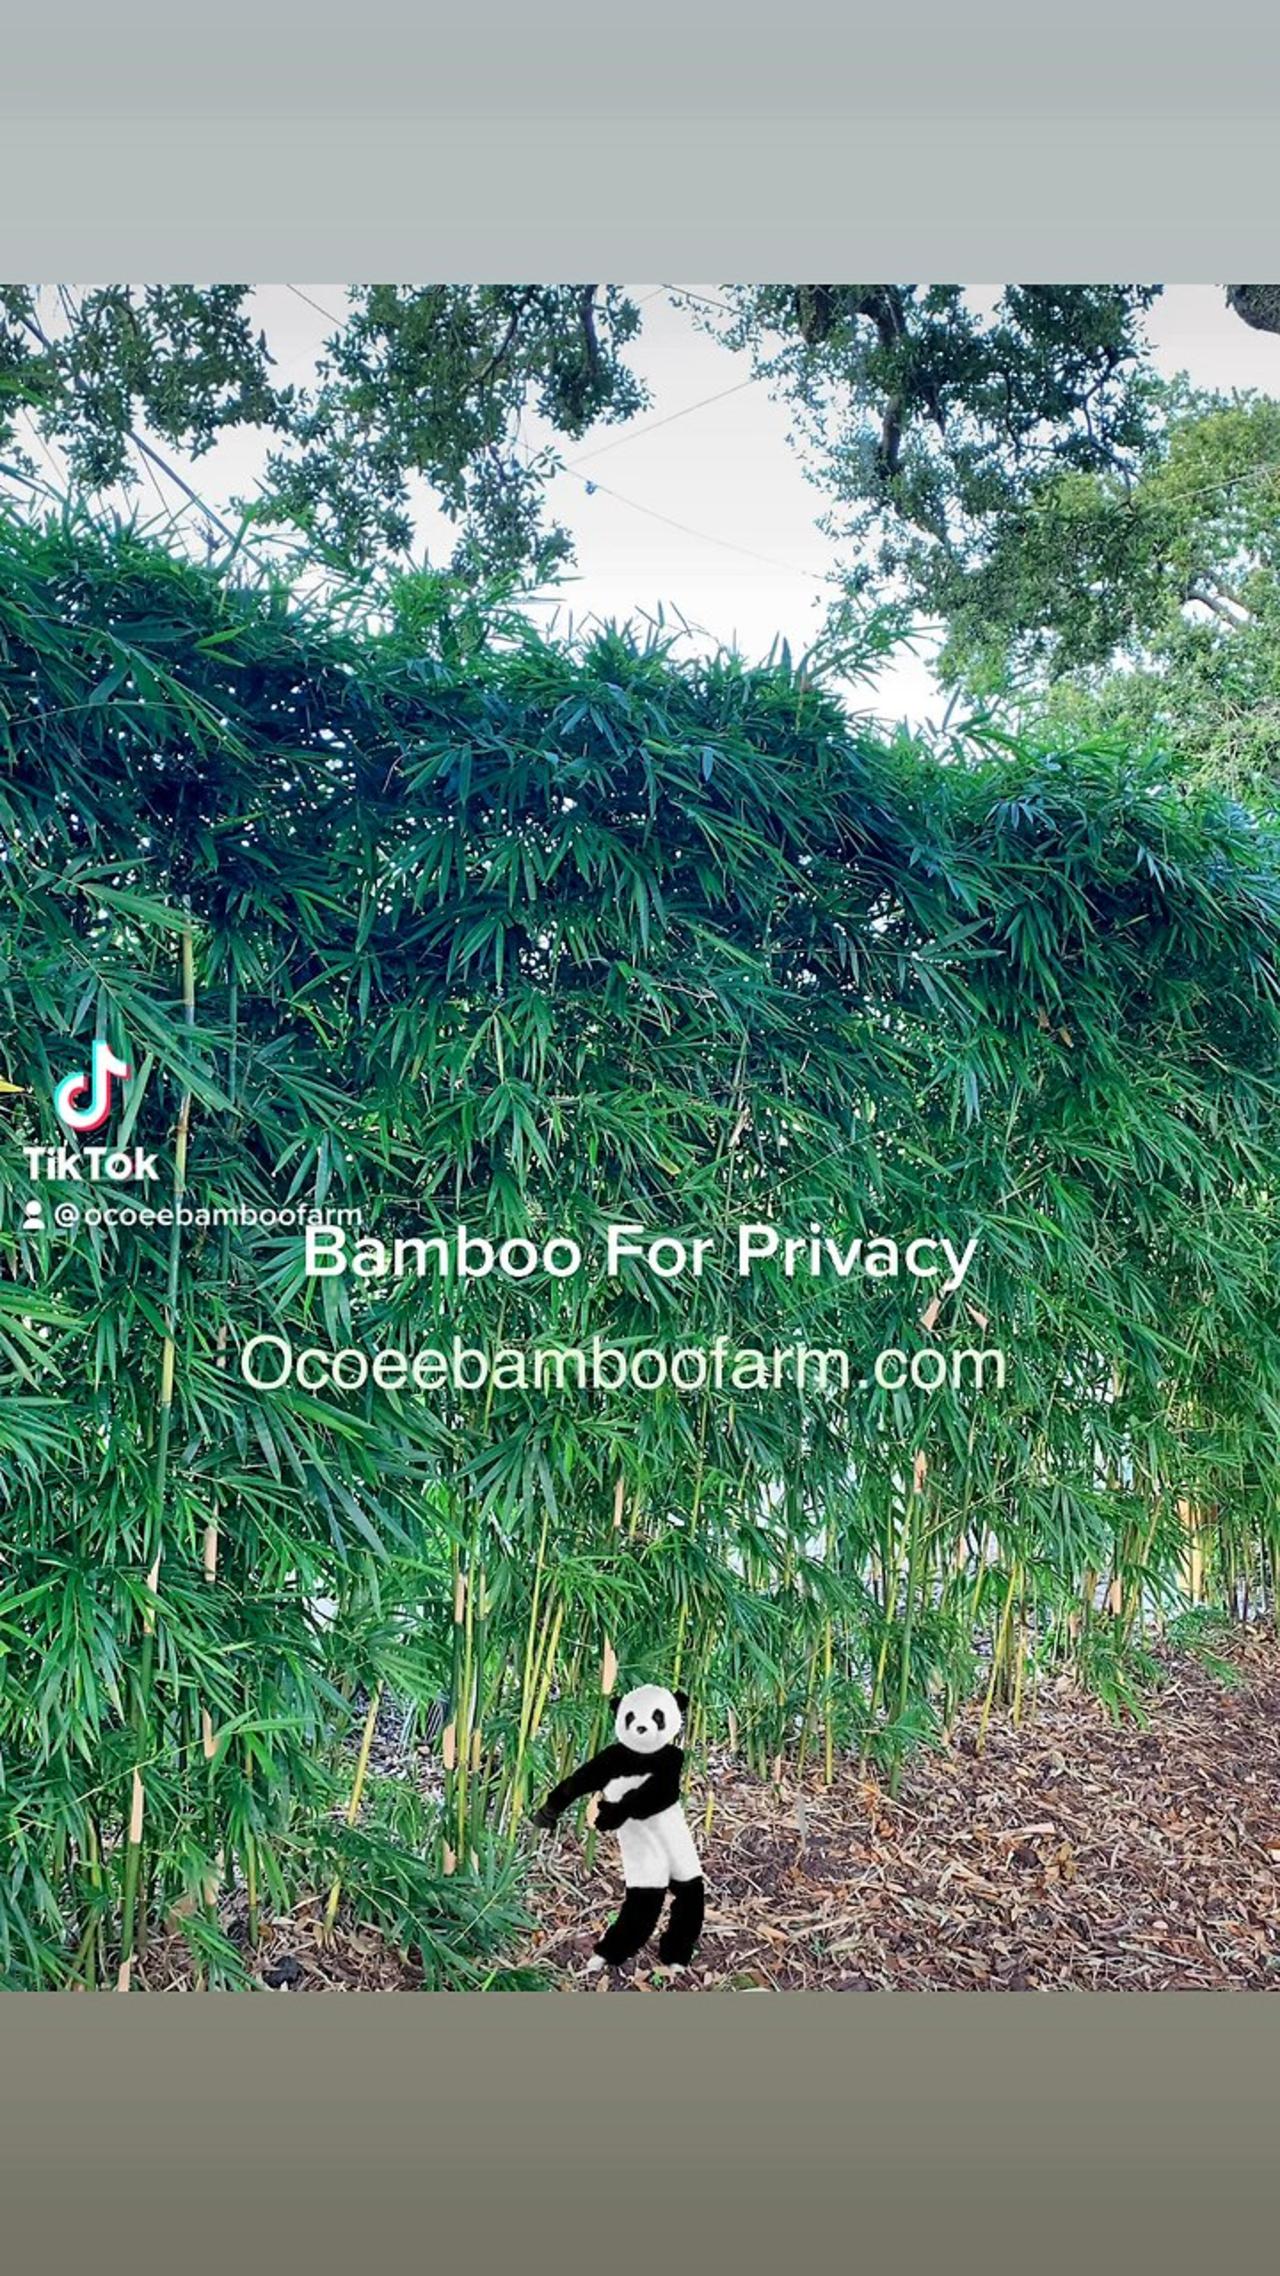 Bamboo For Privacy in Florida